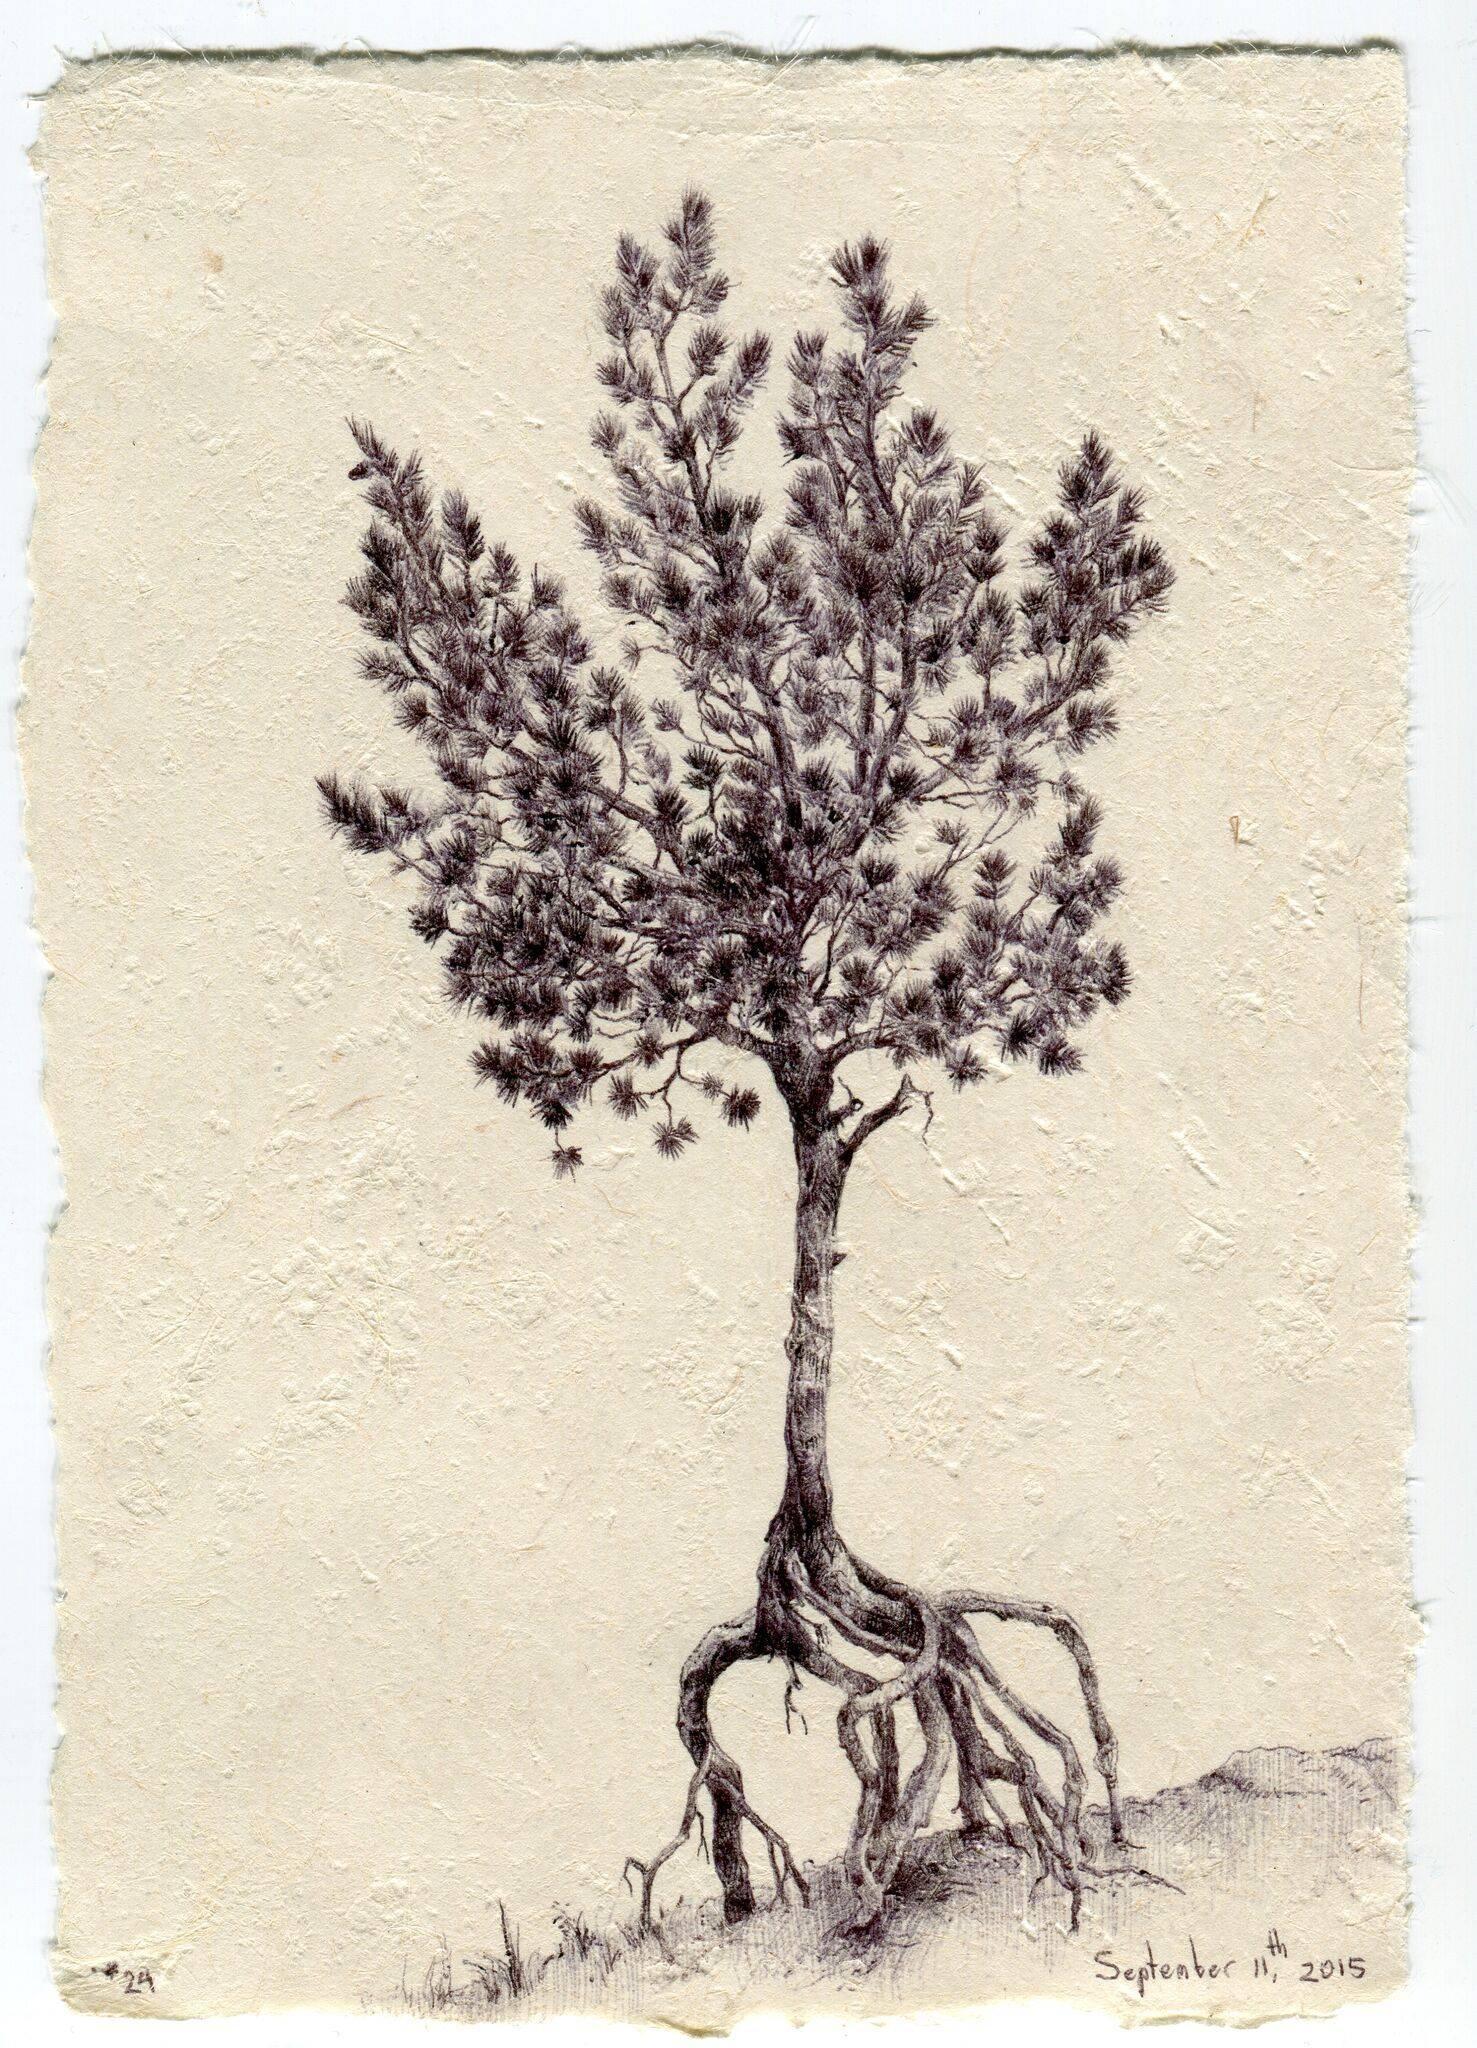 Framed: 10.5 x 10.5 in.

In her drawing, Tree No. 24, September 11, 2015, Dina Brodsky uses ink to emphasize the textures of the tree bark and its foliage. By working strictly in black and white, Brodsky is able to attend to the peaks and valleys of